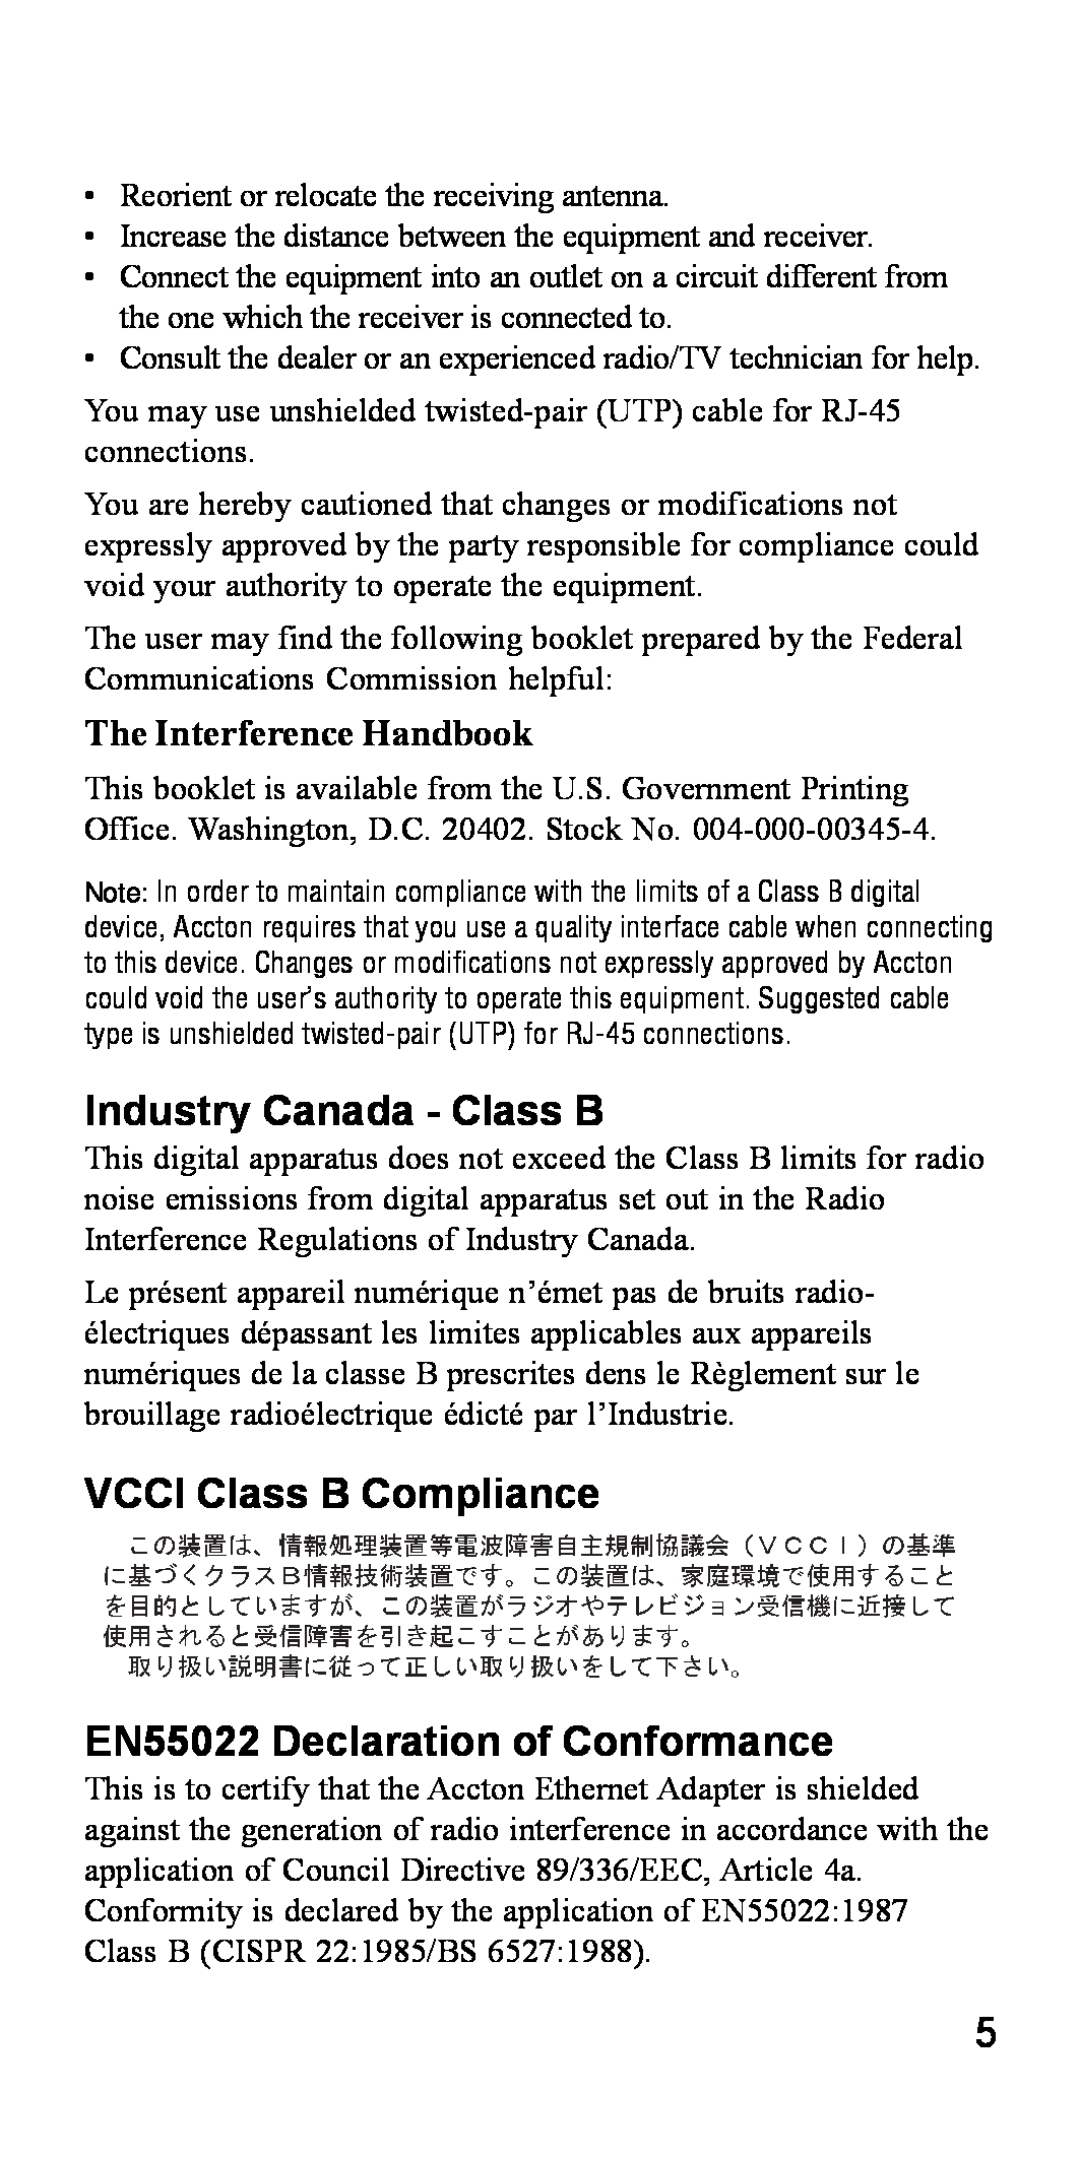 Accton Technology 32 specifications Industry Canada - Class B, VCCI Class B Compliance EN55022 Declaration of Conformance 